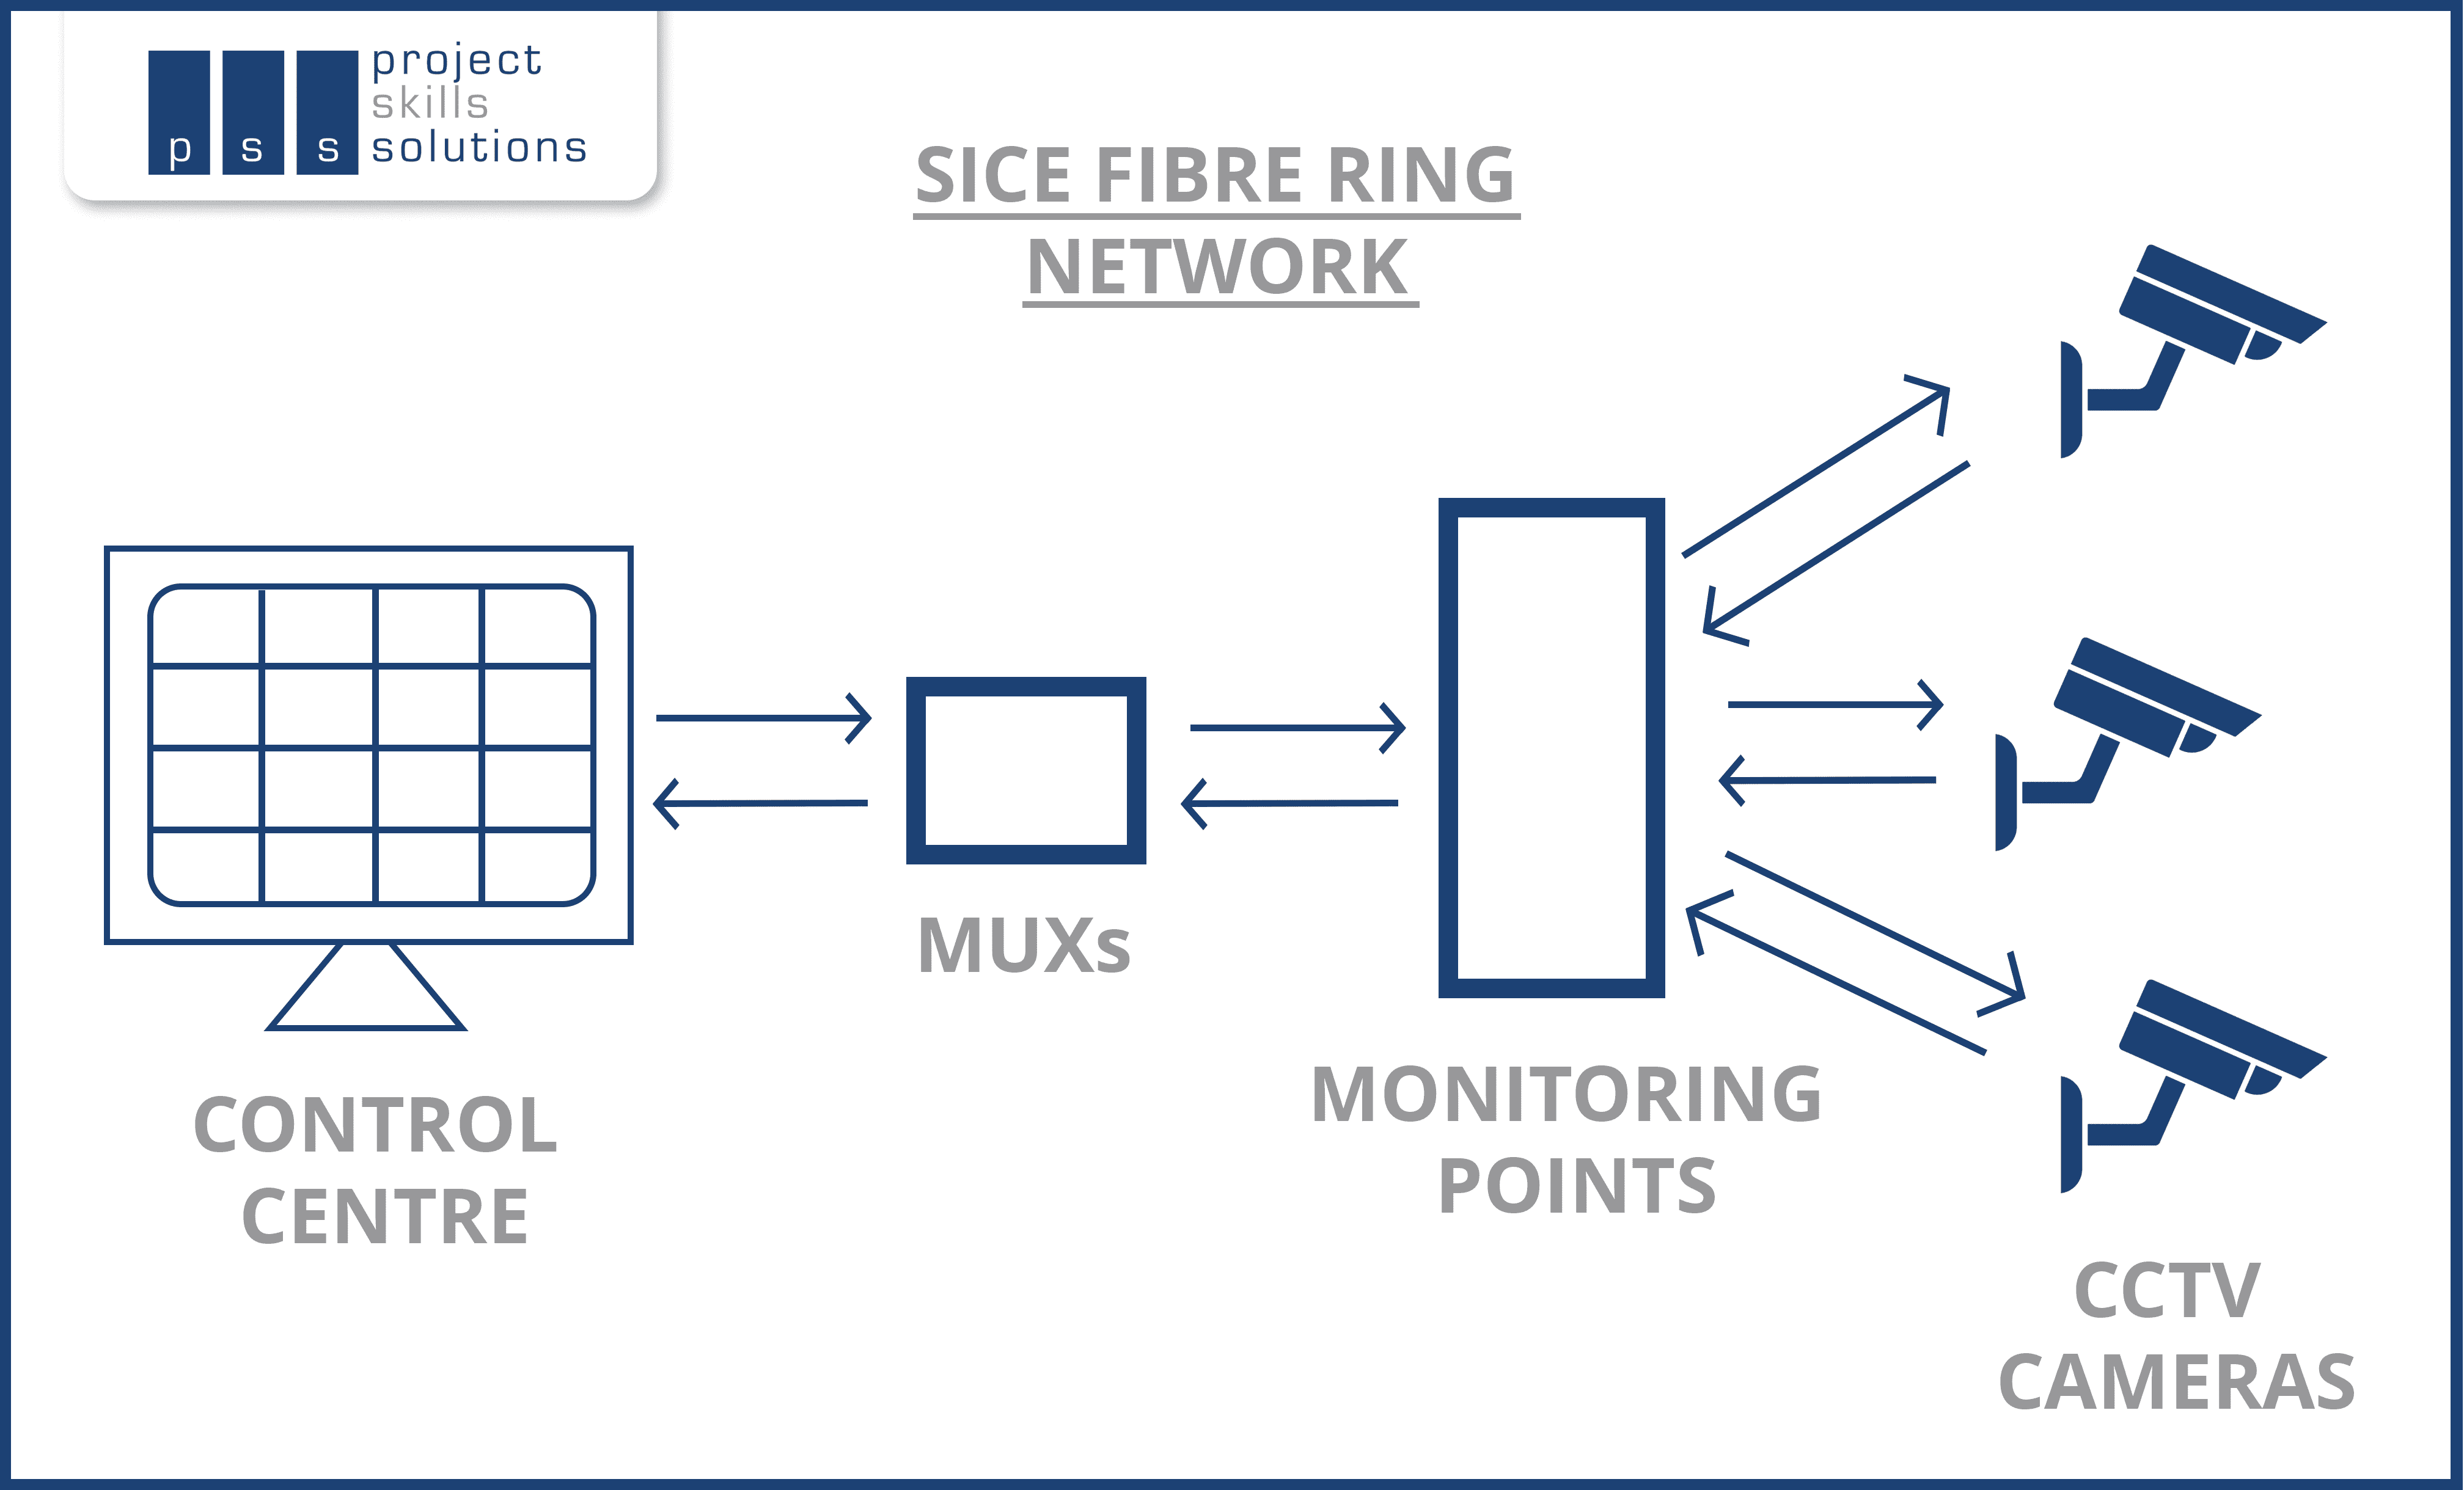 SICE Fibre Ring Diagram/infographic - Project Skills Solutions